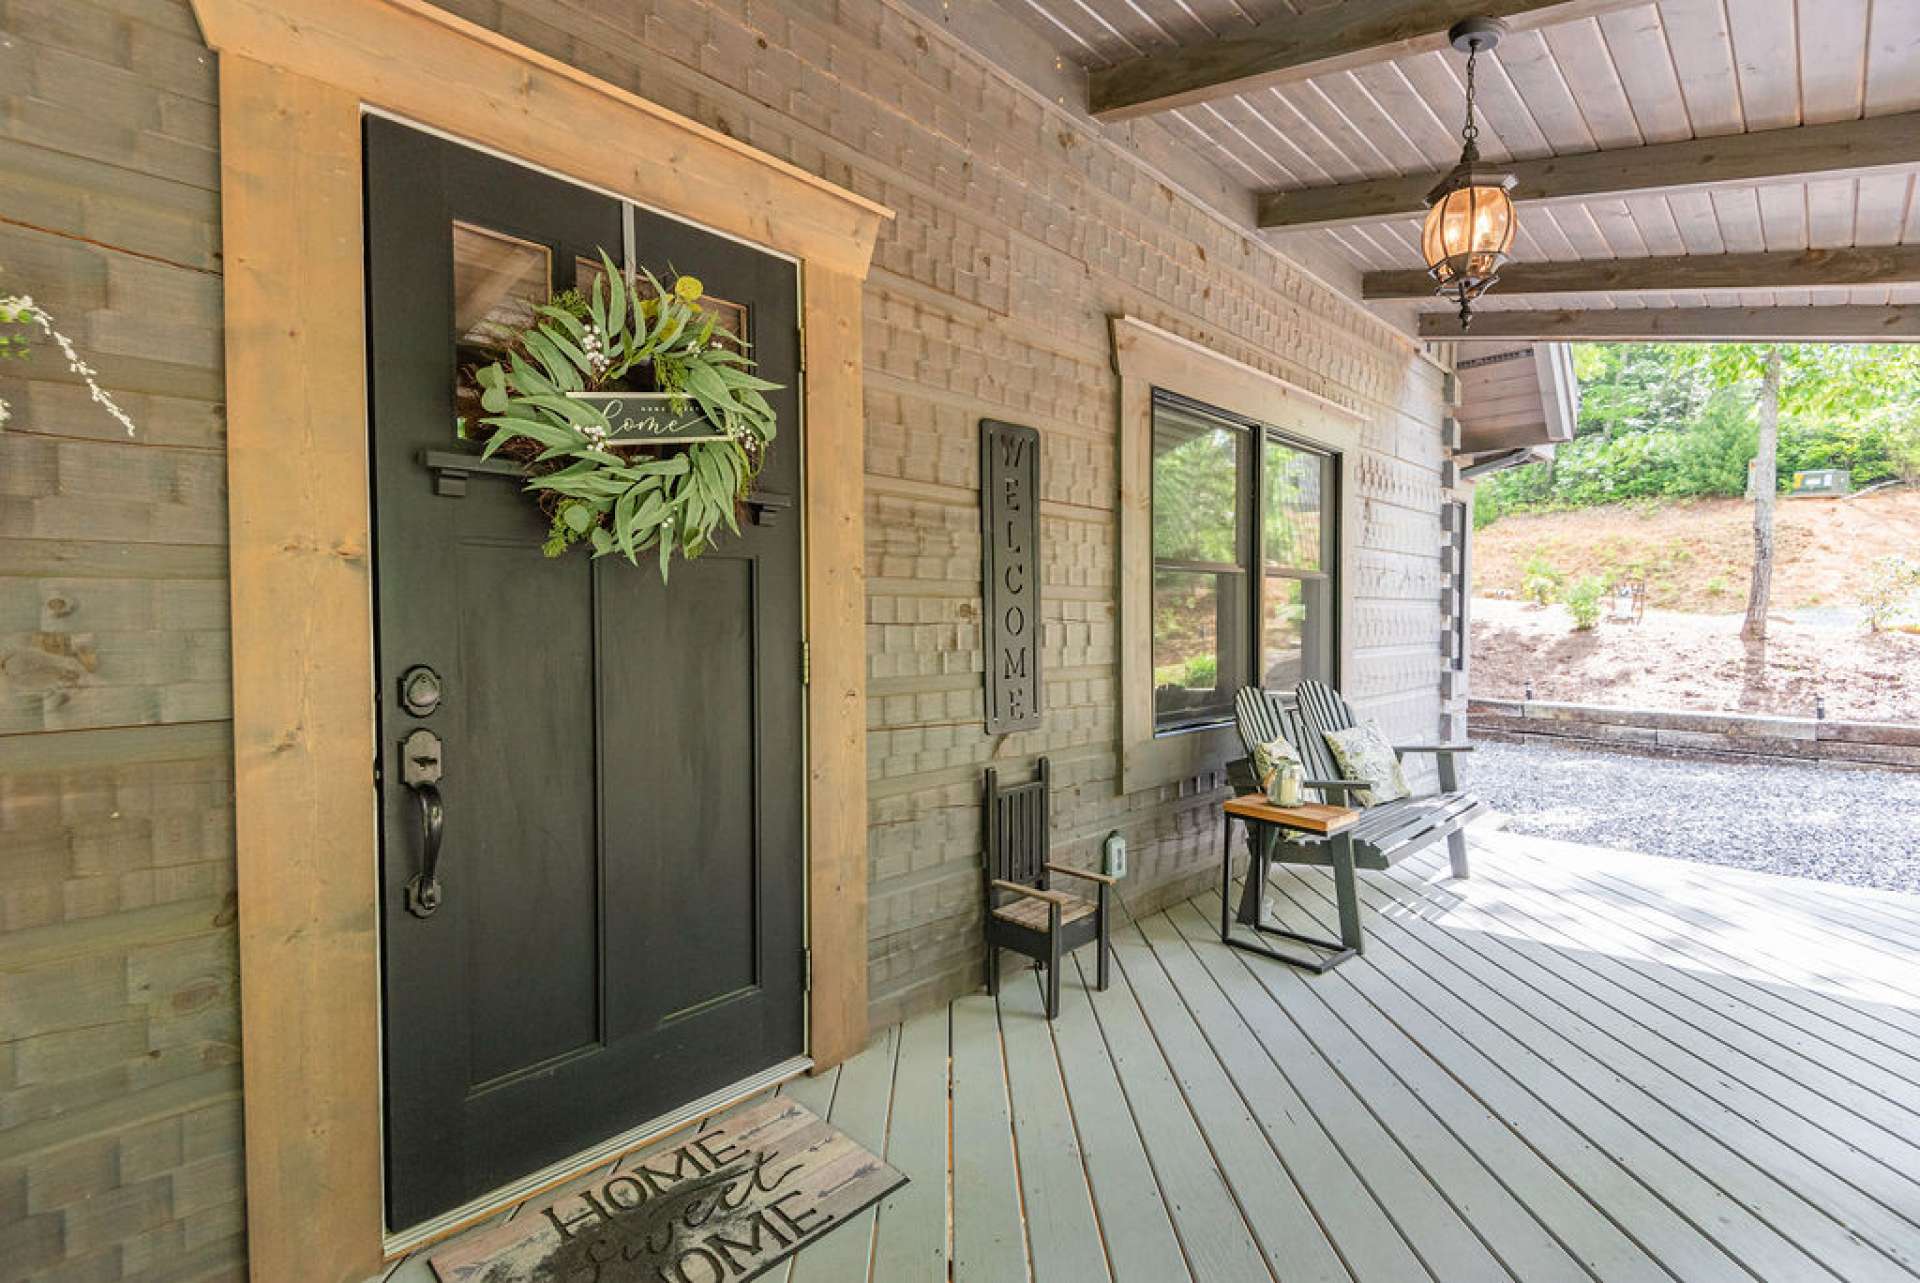 Covered front porch welcomes you and guests.